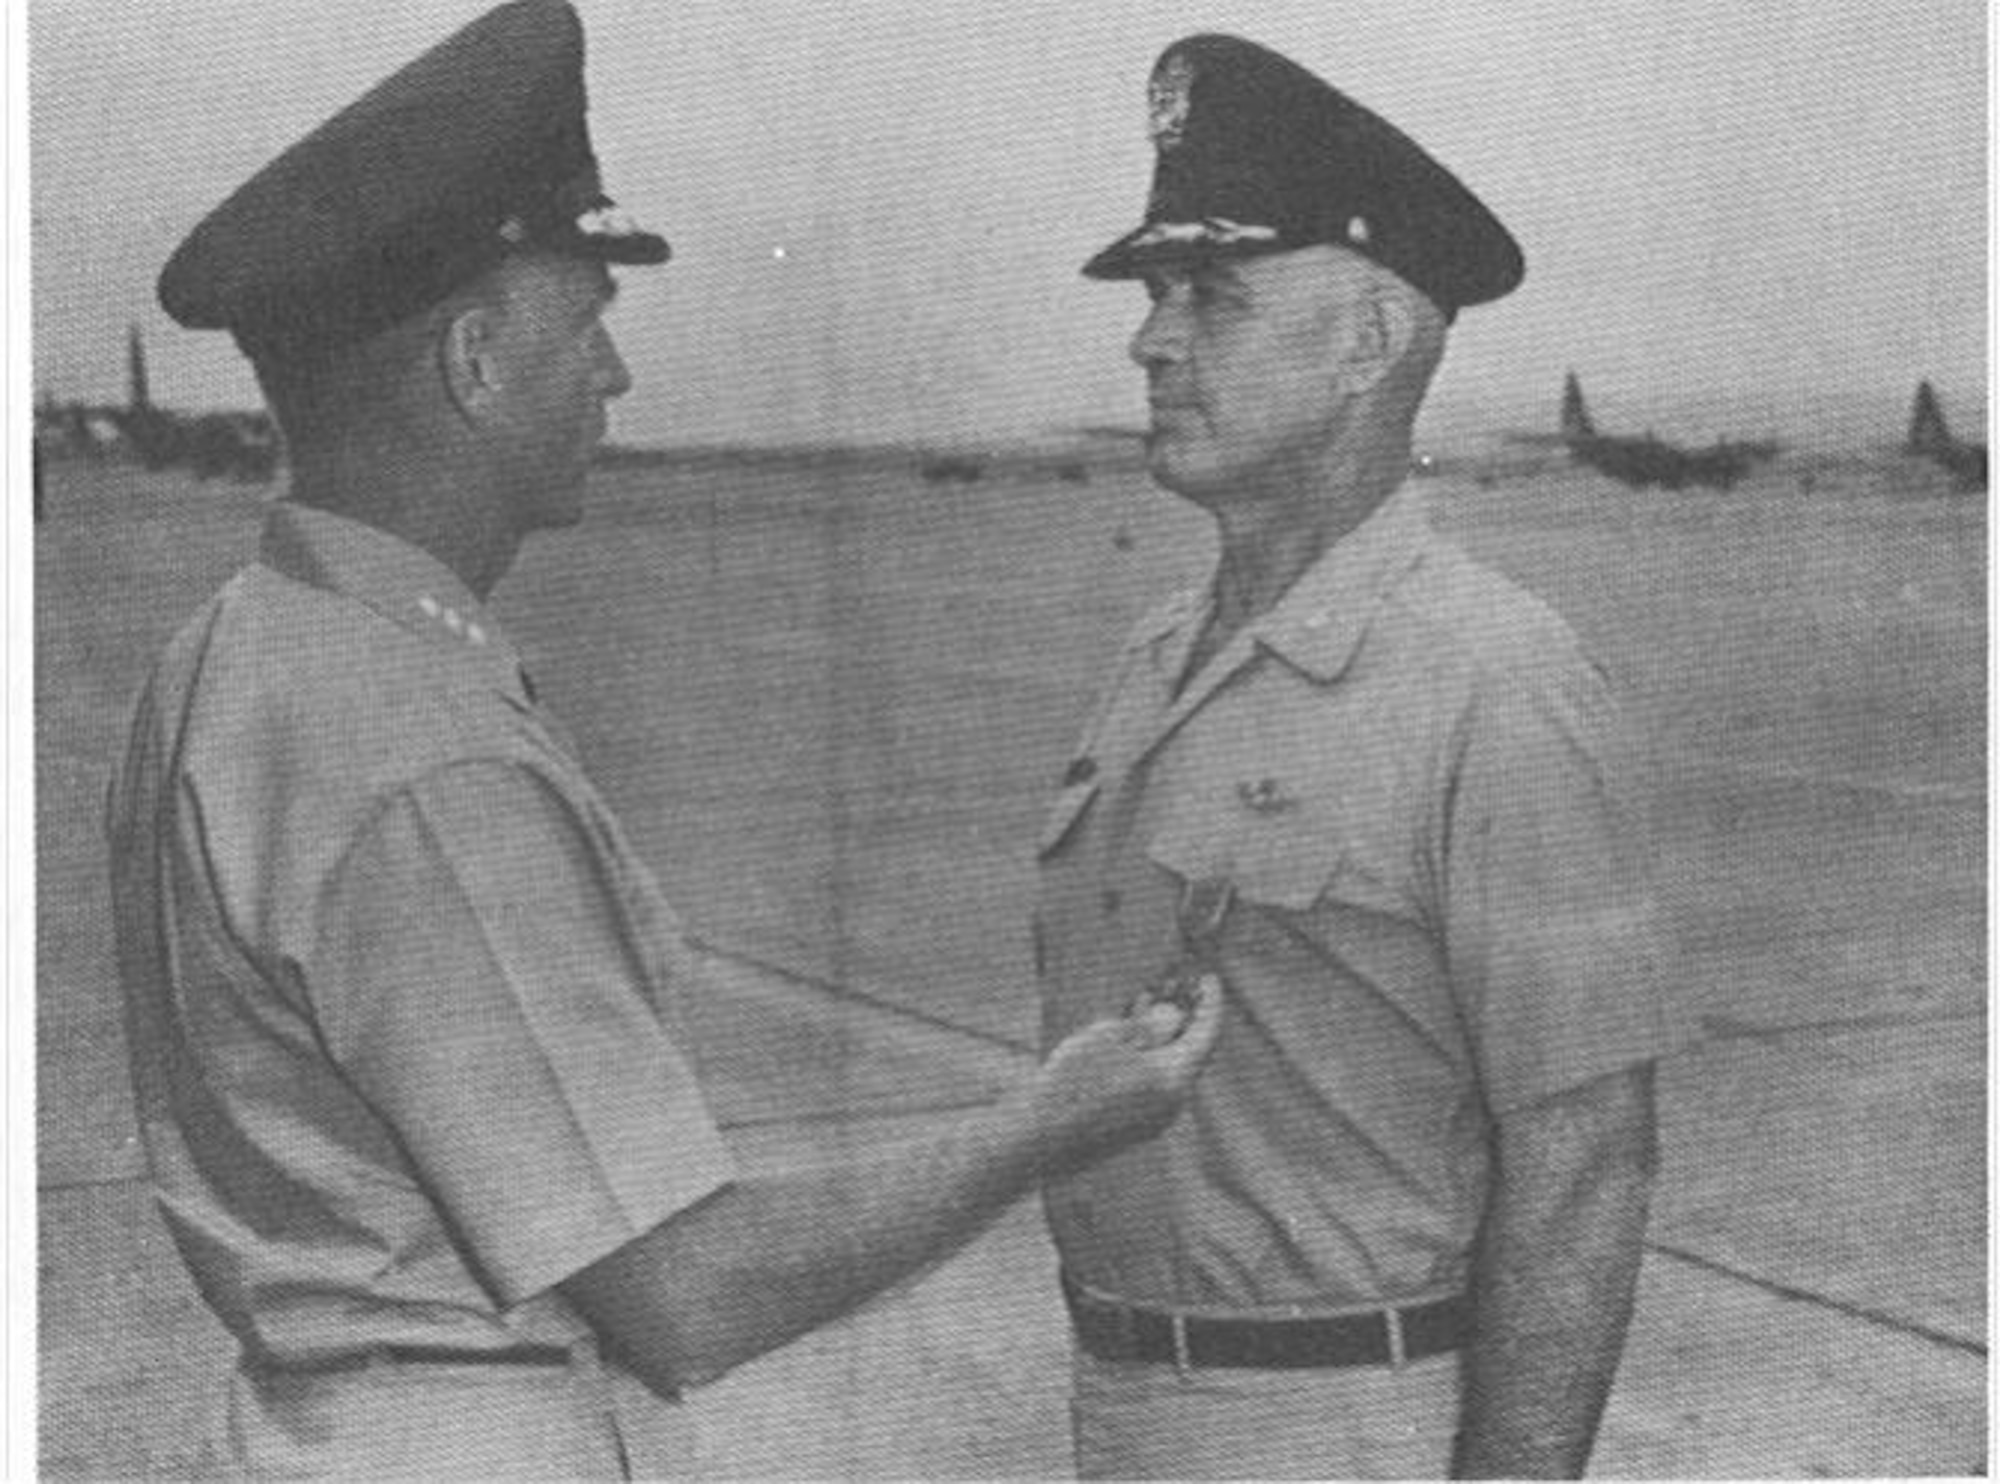 Lt. Col. William Boyd, 314th Tactical Airlift Wing, is being presented the Air Force Cross May 12, 1968 for his actions at Kham Duc. (Courtesy photo)